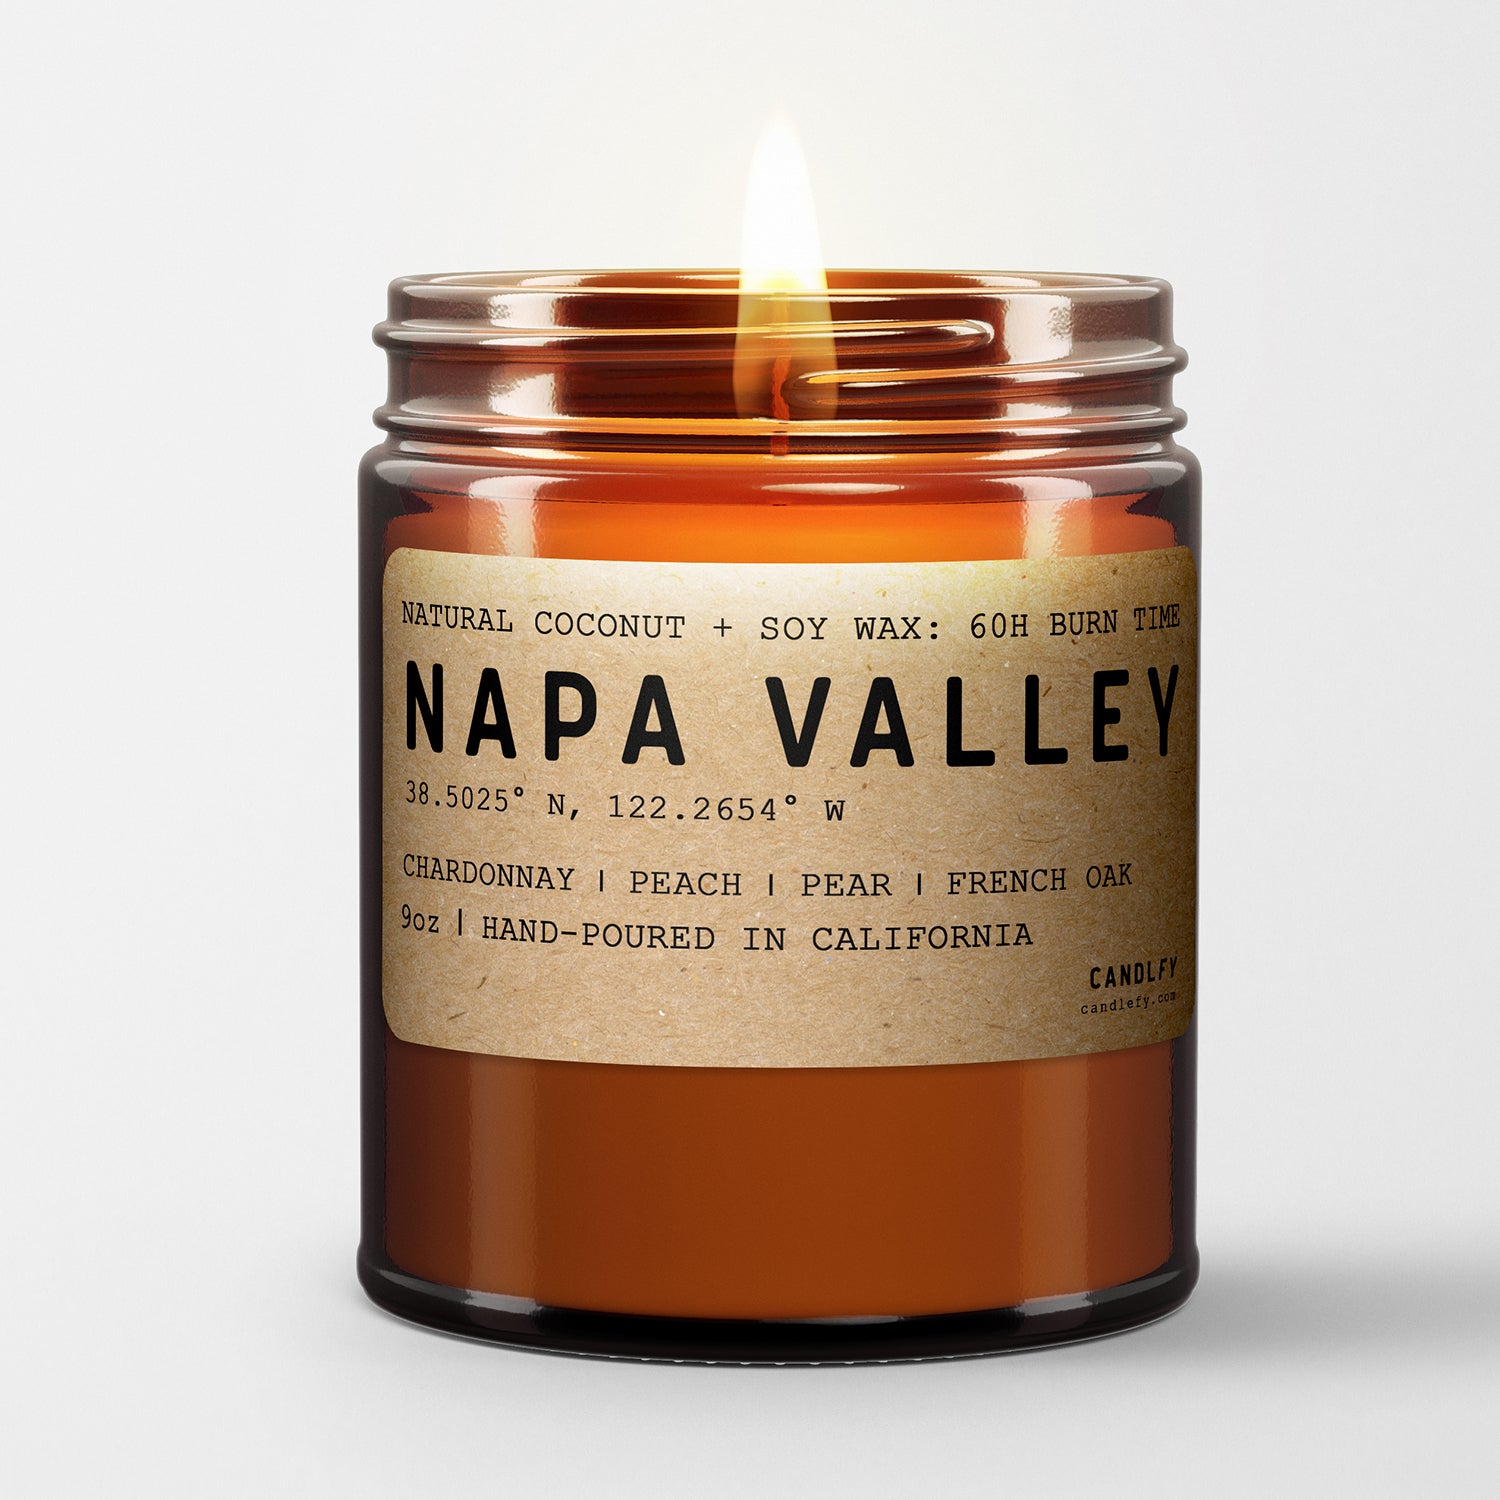 Napa Valley California Scented Candle (Chardonnay, Peach, French Oak)